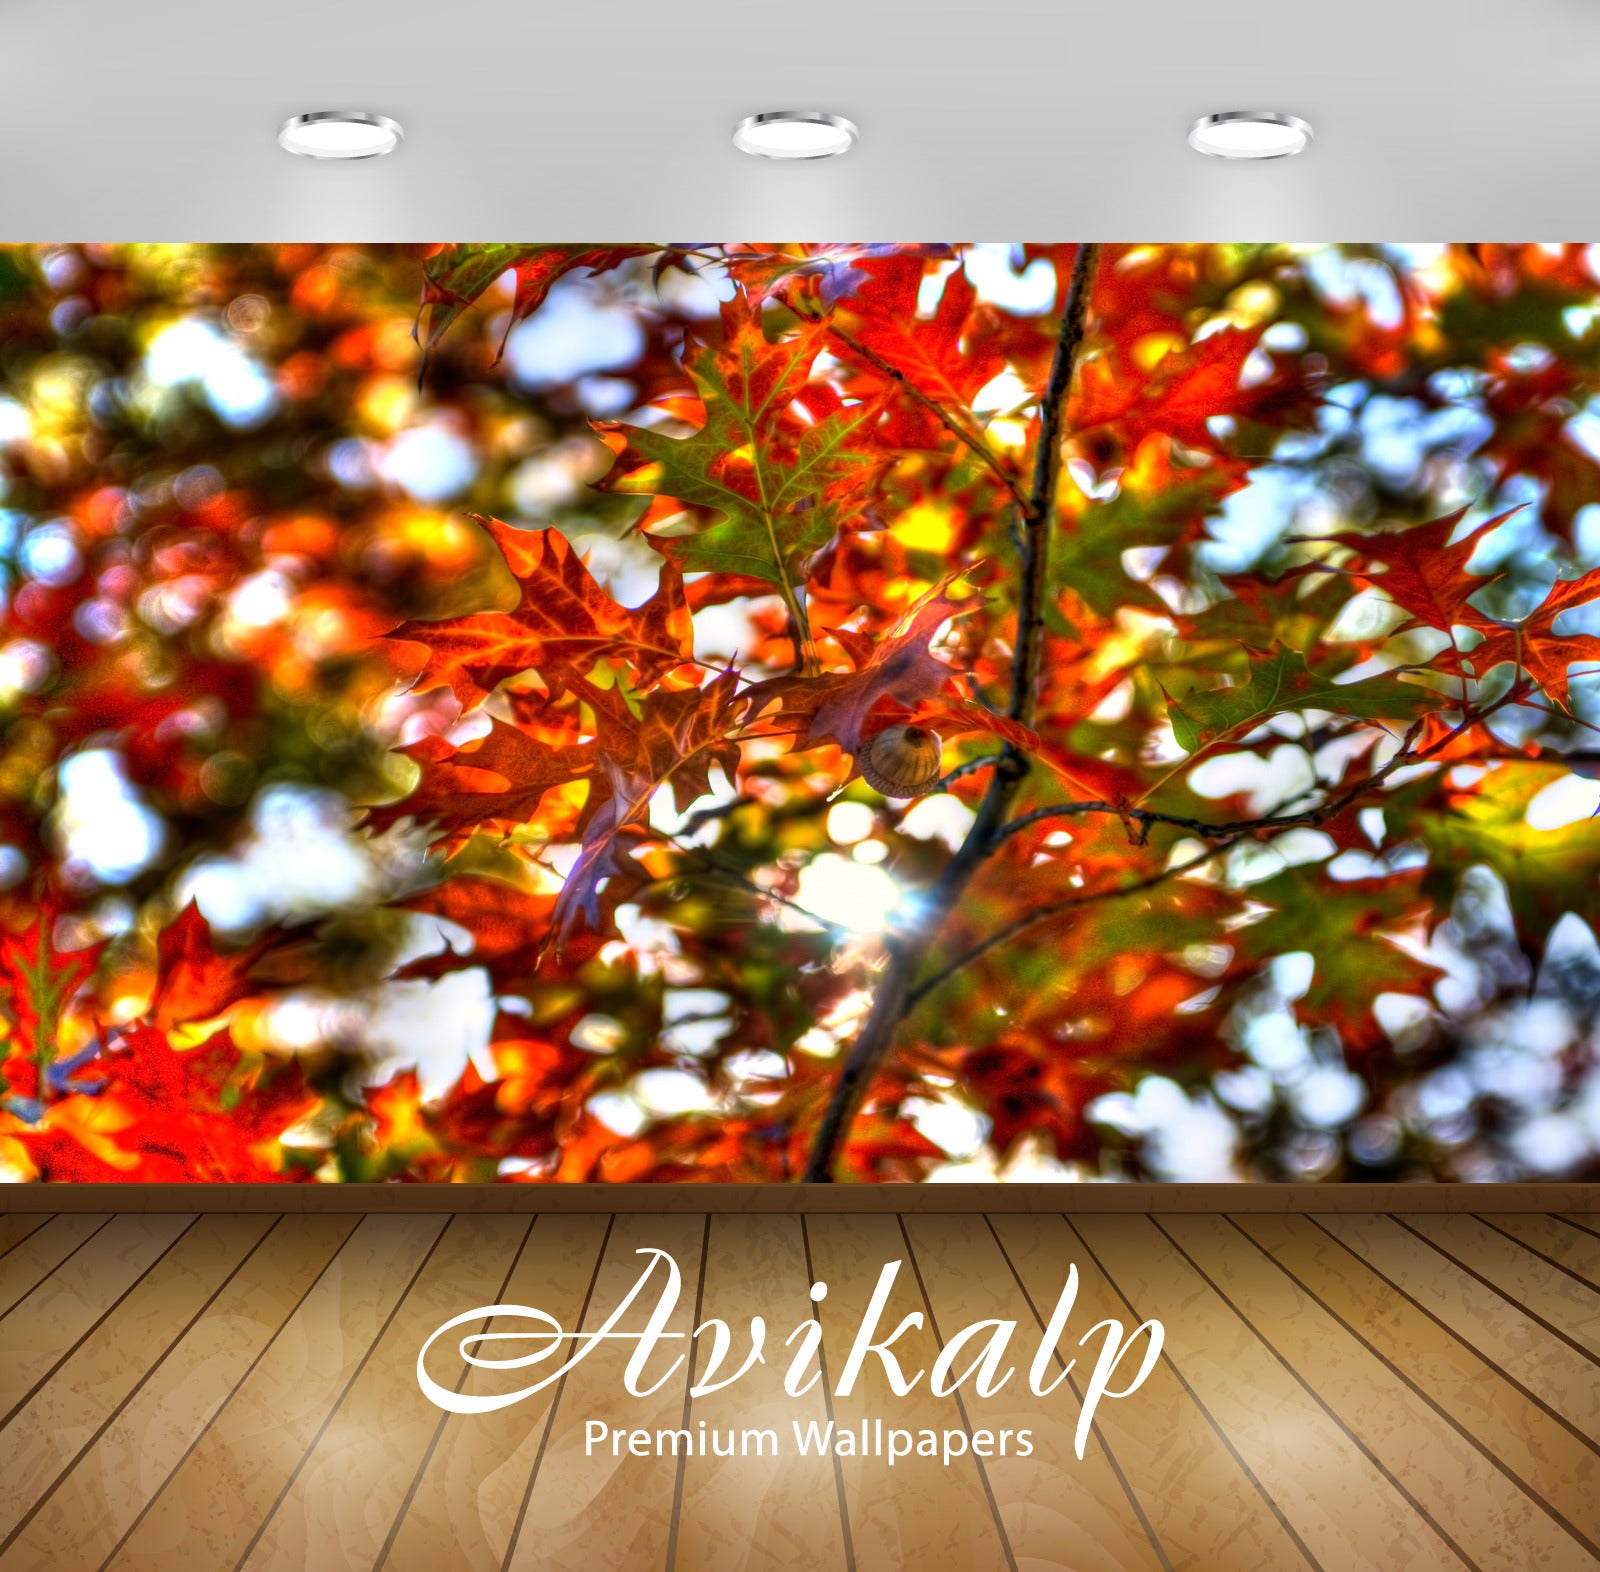 Avikalp Exclusive Awi1579 Beautiful Leaves Full HD Wallpapers for Living room, Hall, Kids Room, Kitc